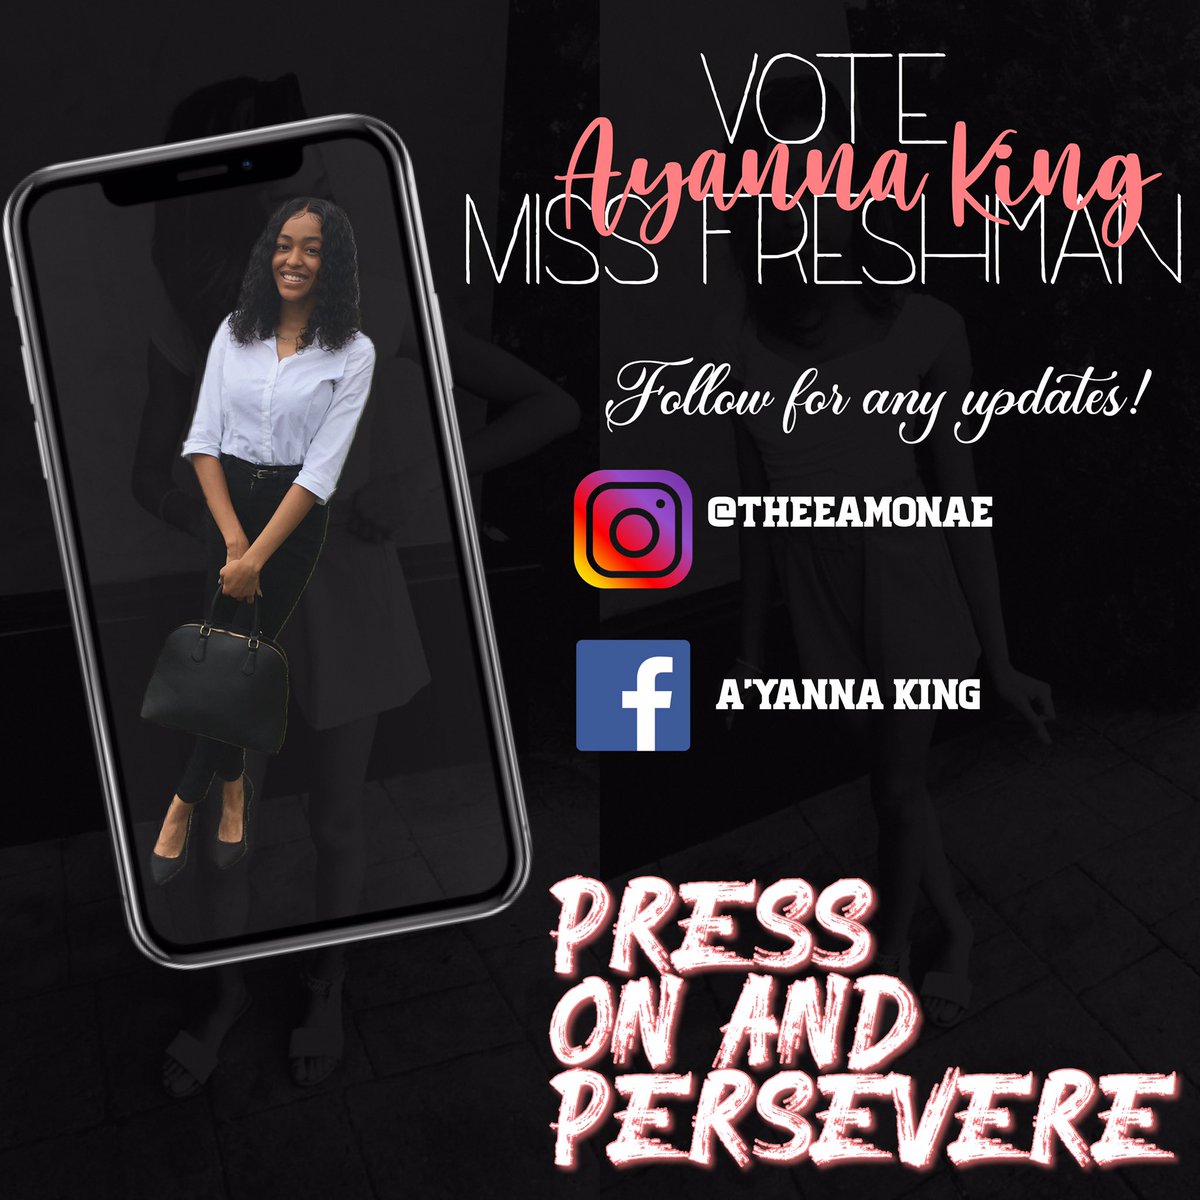 Greetings fellow TU peers! I am Ayanna King, majoring in Political Science hailing from THEE Historical Birmingham, AL. I am proudly running to be YOUR next 2020-2021 Miss Freshman standing BOLDLY on the platform of POP, Press on and Persevere. @StuLifeatTU #tu24 #tuskegee2024